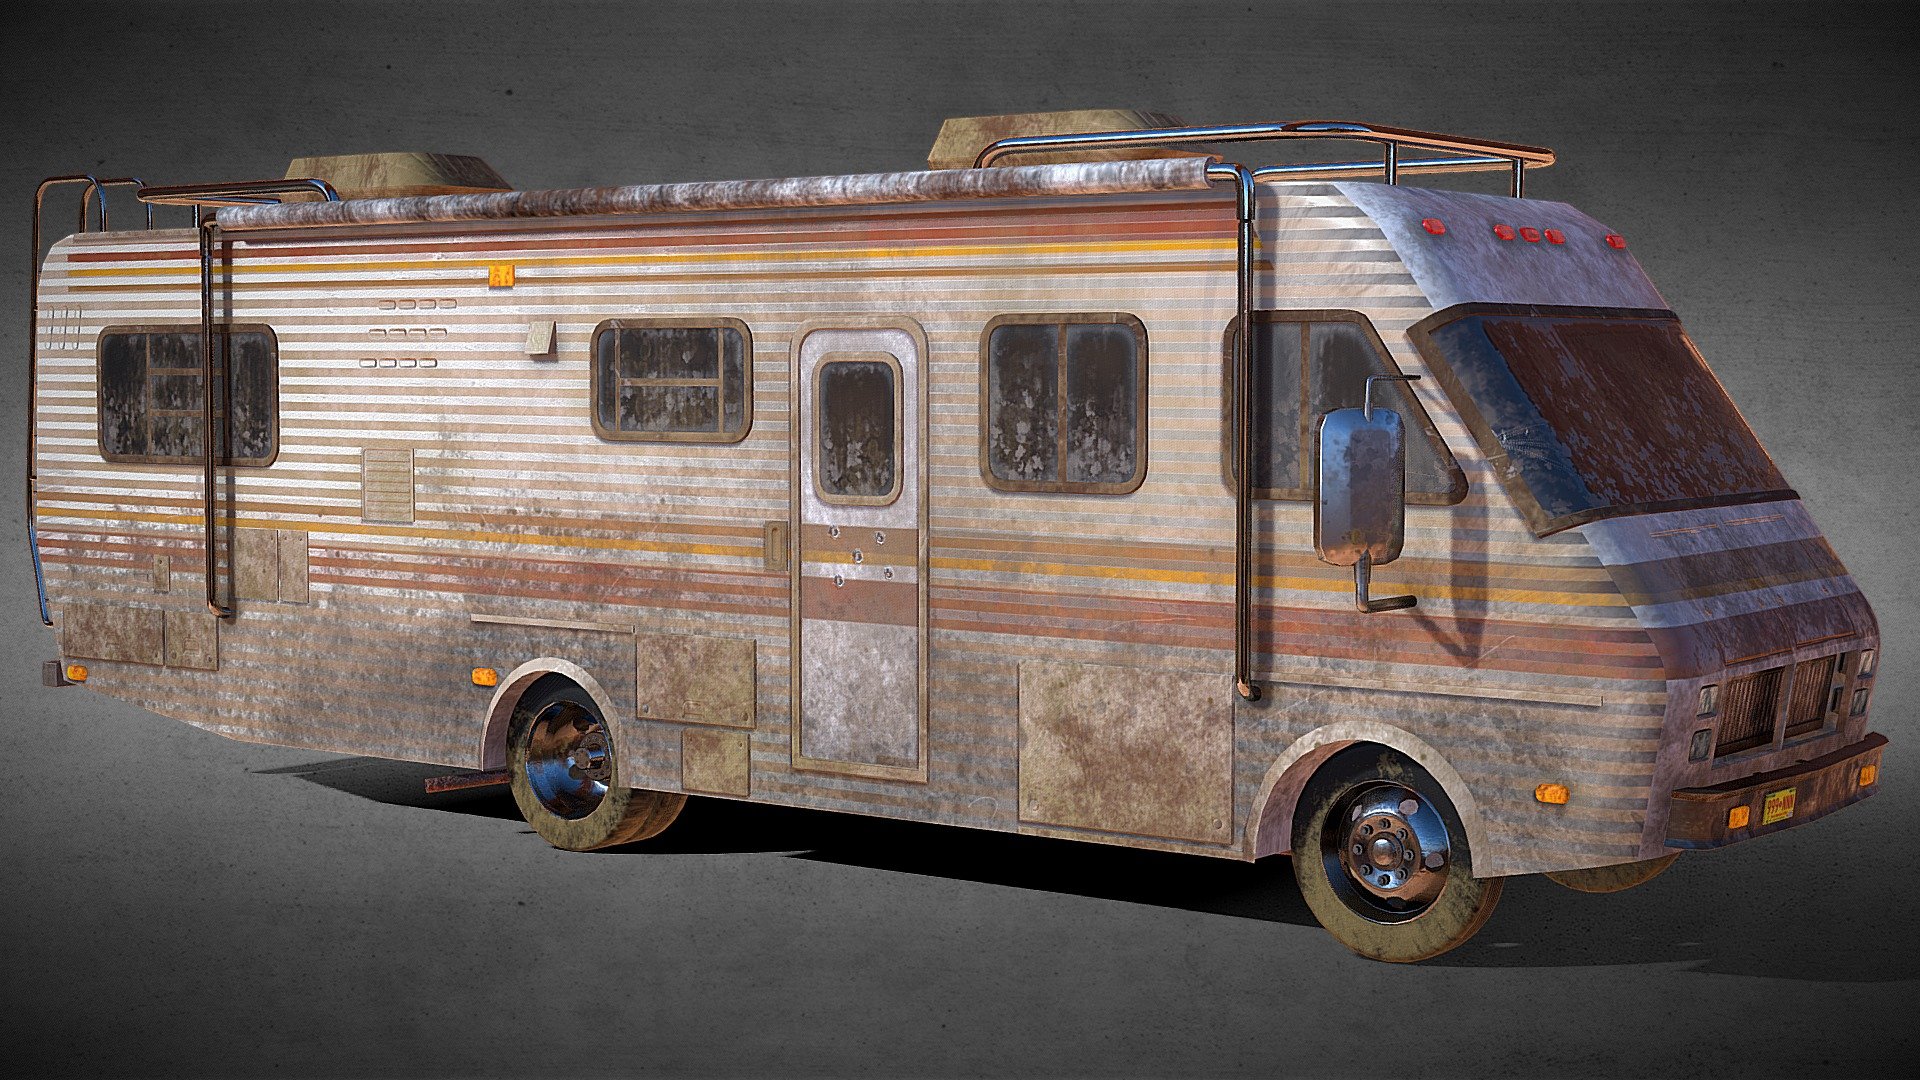 This is the RV that Jesse and Walter used to cook untill season season 3 episode 6.

I created the main body in Blender and textured it in Adobe Substance Painter.

It has good quality PBR Materials that were custom created for this mesh.

Please leave any feedback and I hope you enjoy this model  :) - Fleetwood Bounder - Breaking Bad - Download Free 3D model by Zack_Hawley 3d model